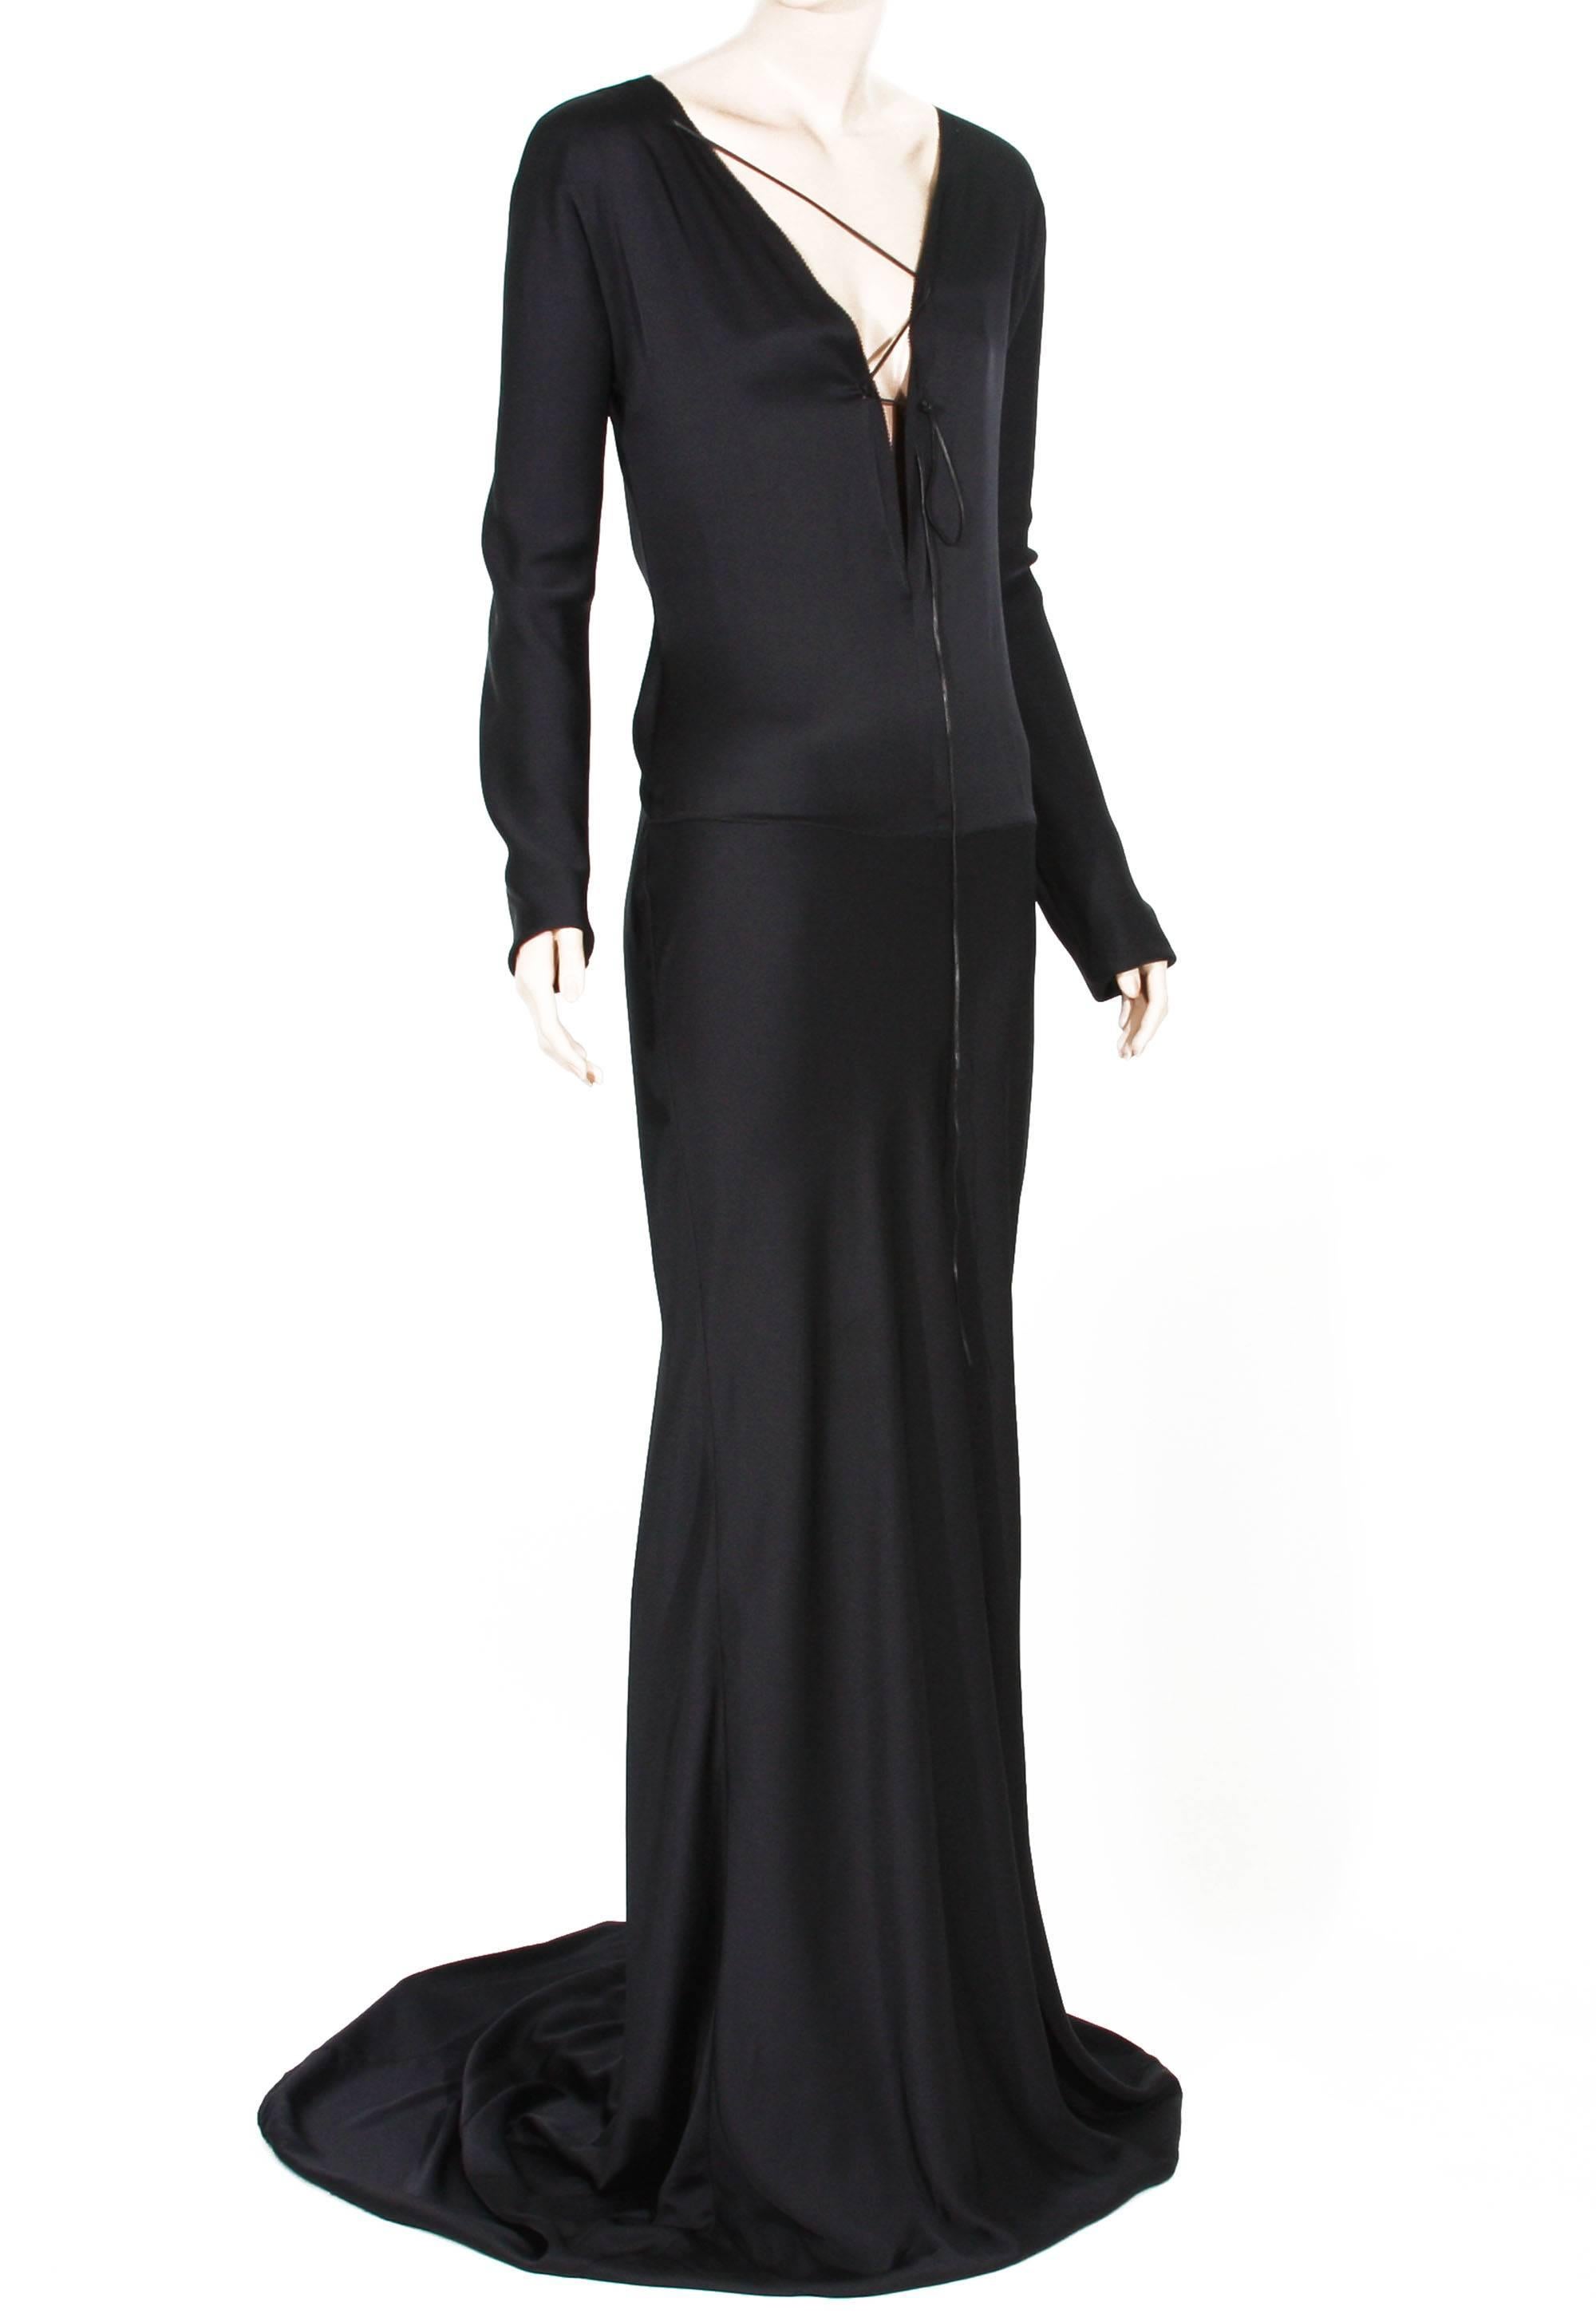 Tom Ford for Gucci Black Silk Gown
Fall/Winter 2002 Collection
Designer size 44
If you're looking for that incredible dress that Helen Hunt wore at the Oscars and one of the models in infamous movie with Kate Hudson 